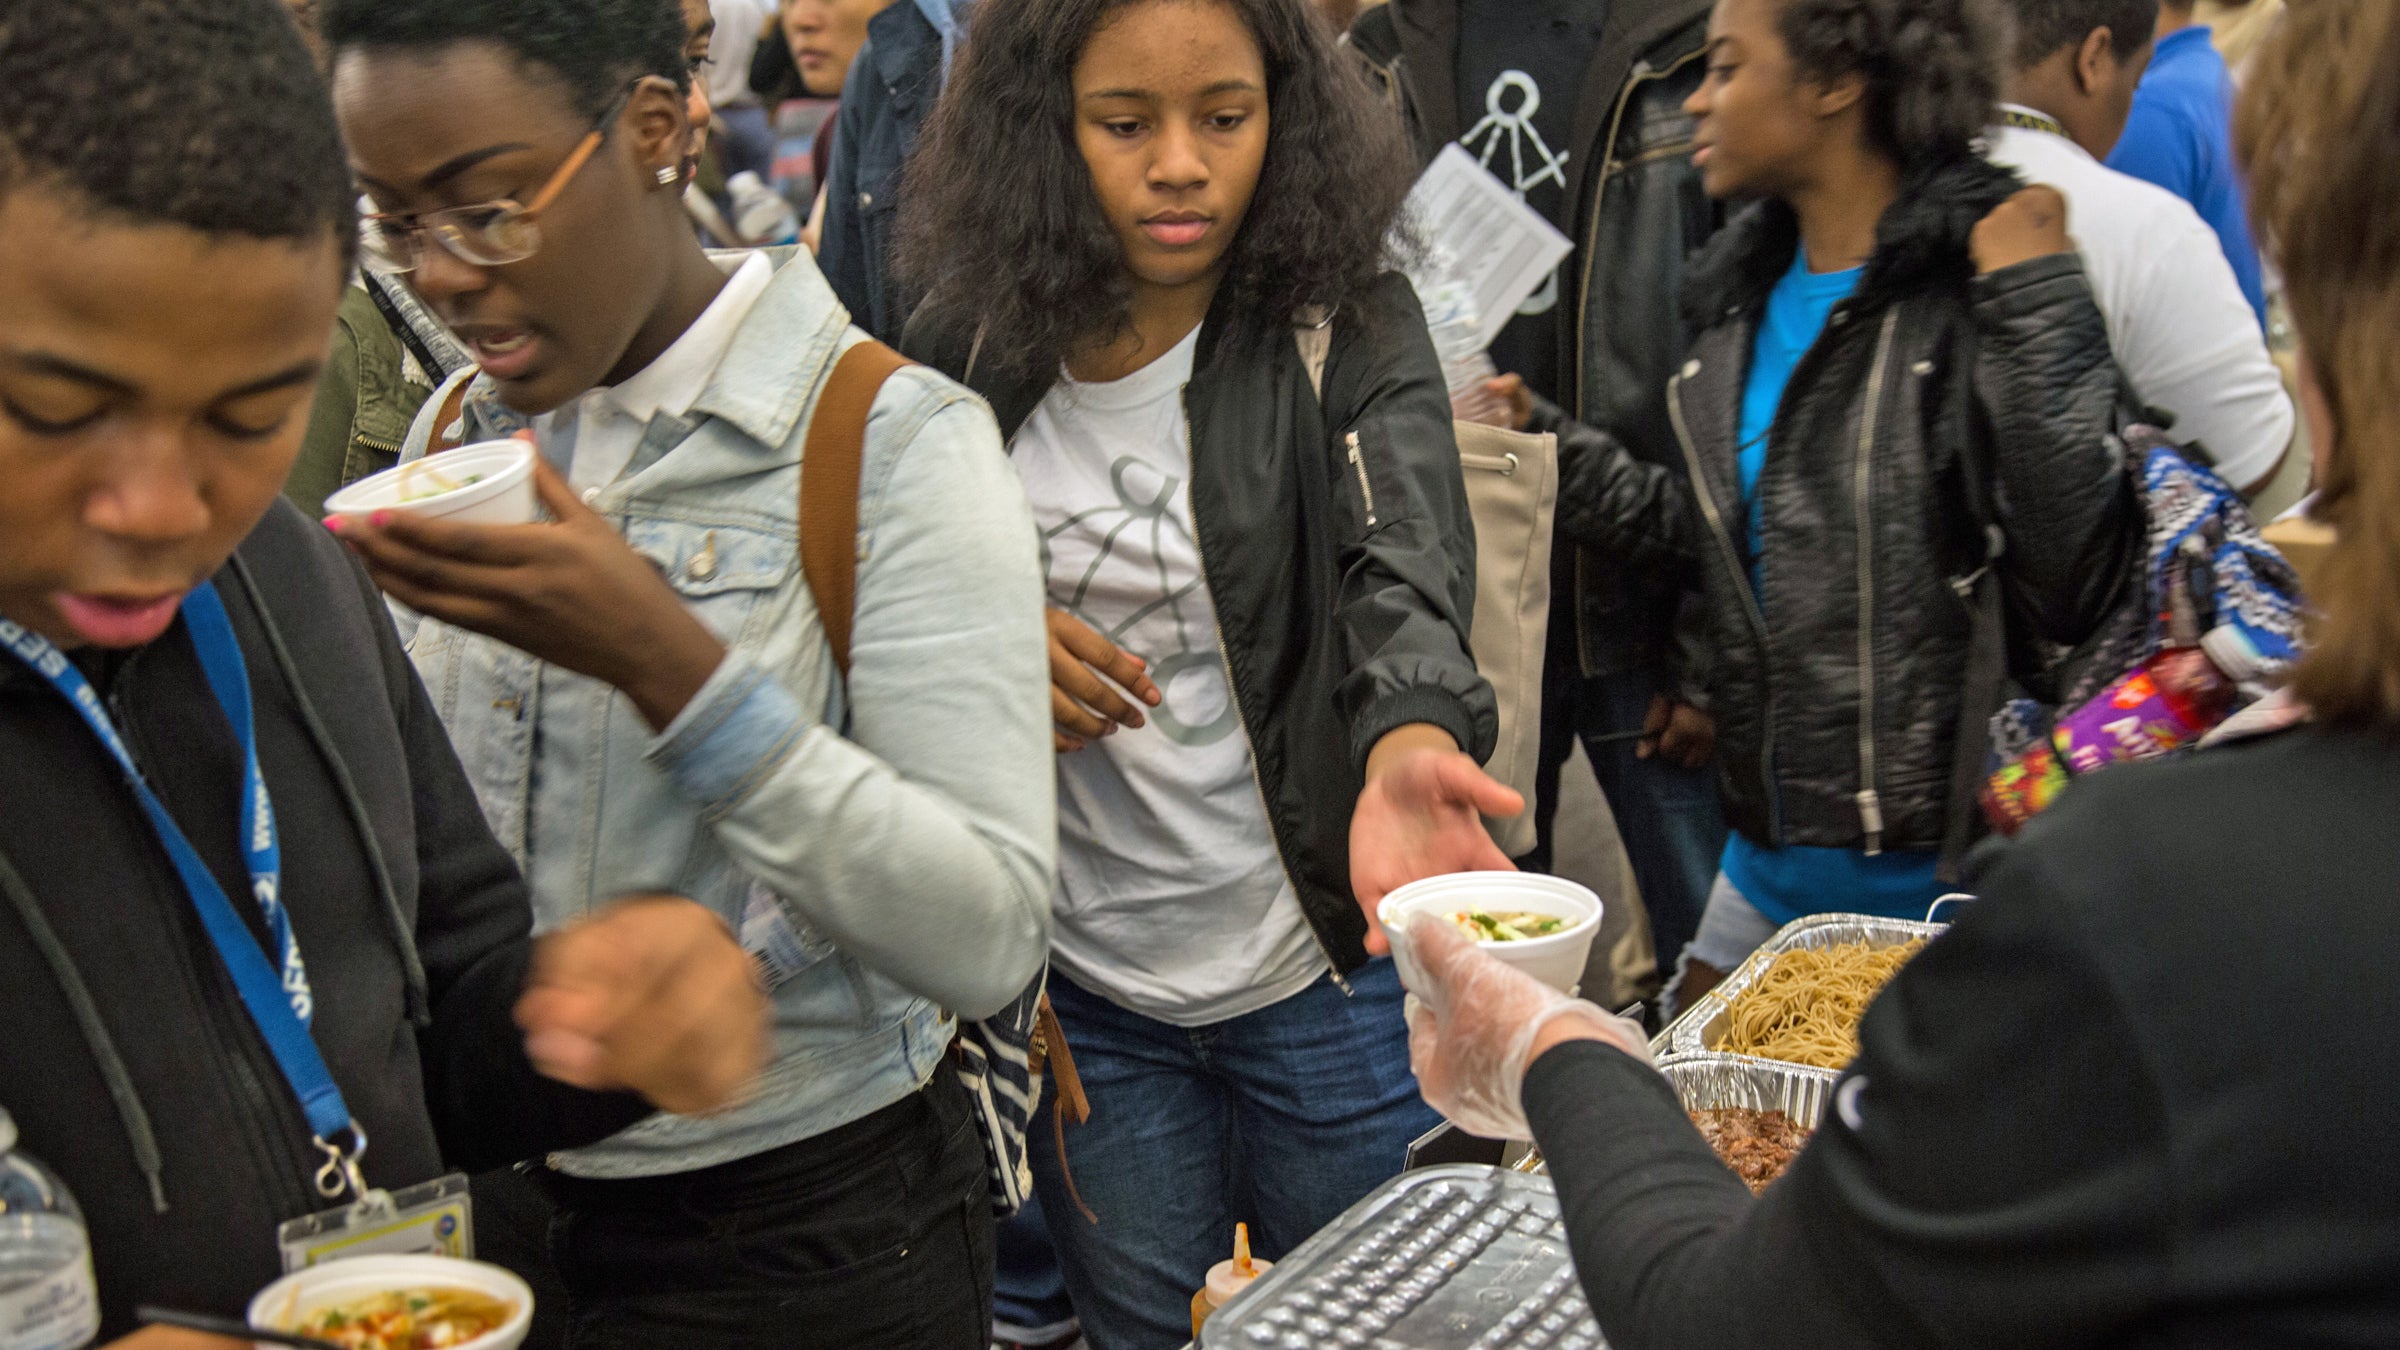 High school students from 7 Philadelphia high schools participate in the first annual student-tested food show where vendors showcase different options for their lunch menu. (Emily Cohen for NewsWorks)